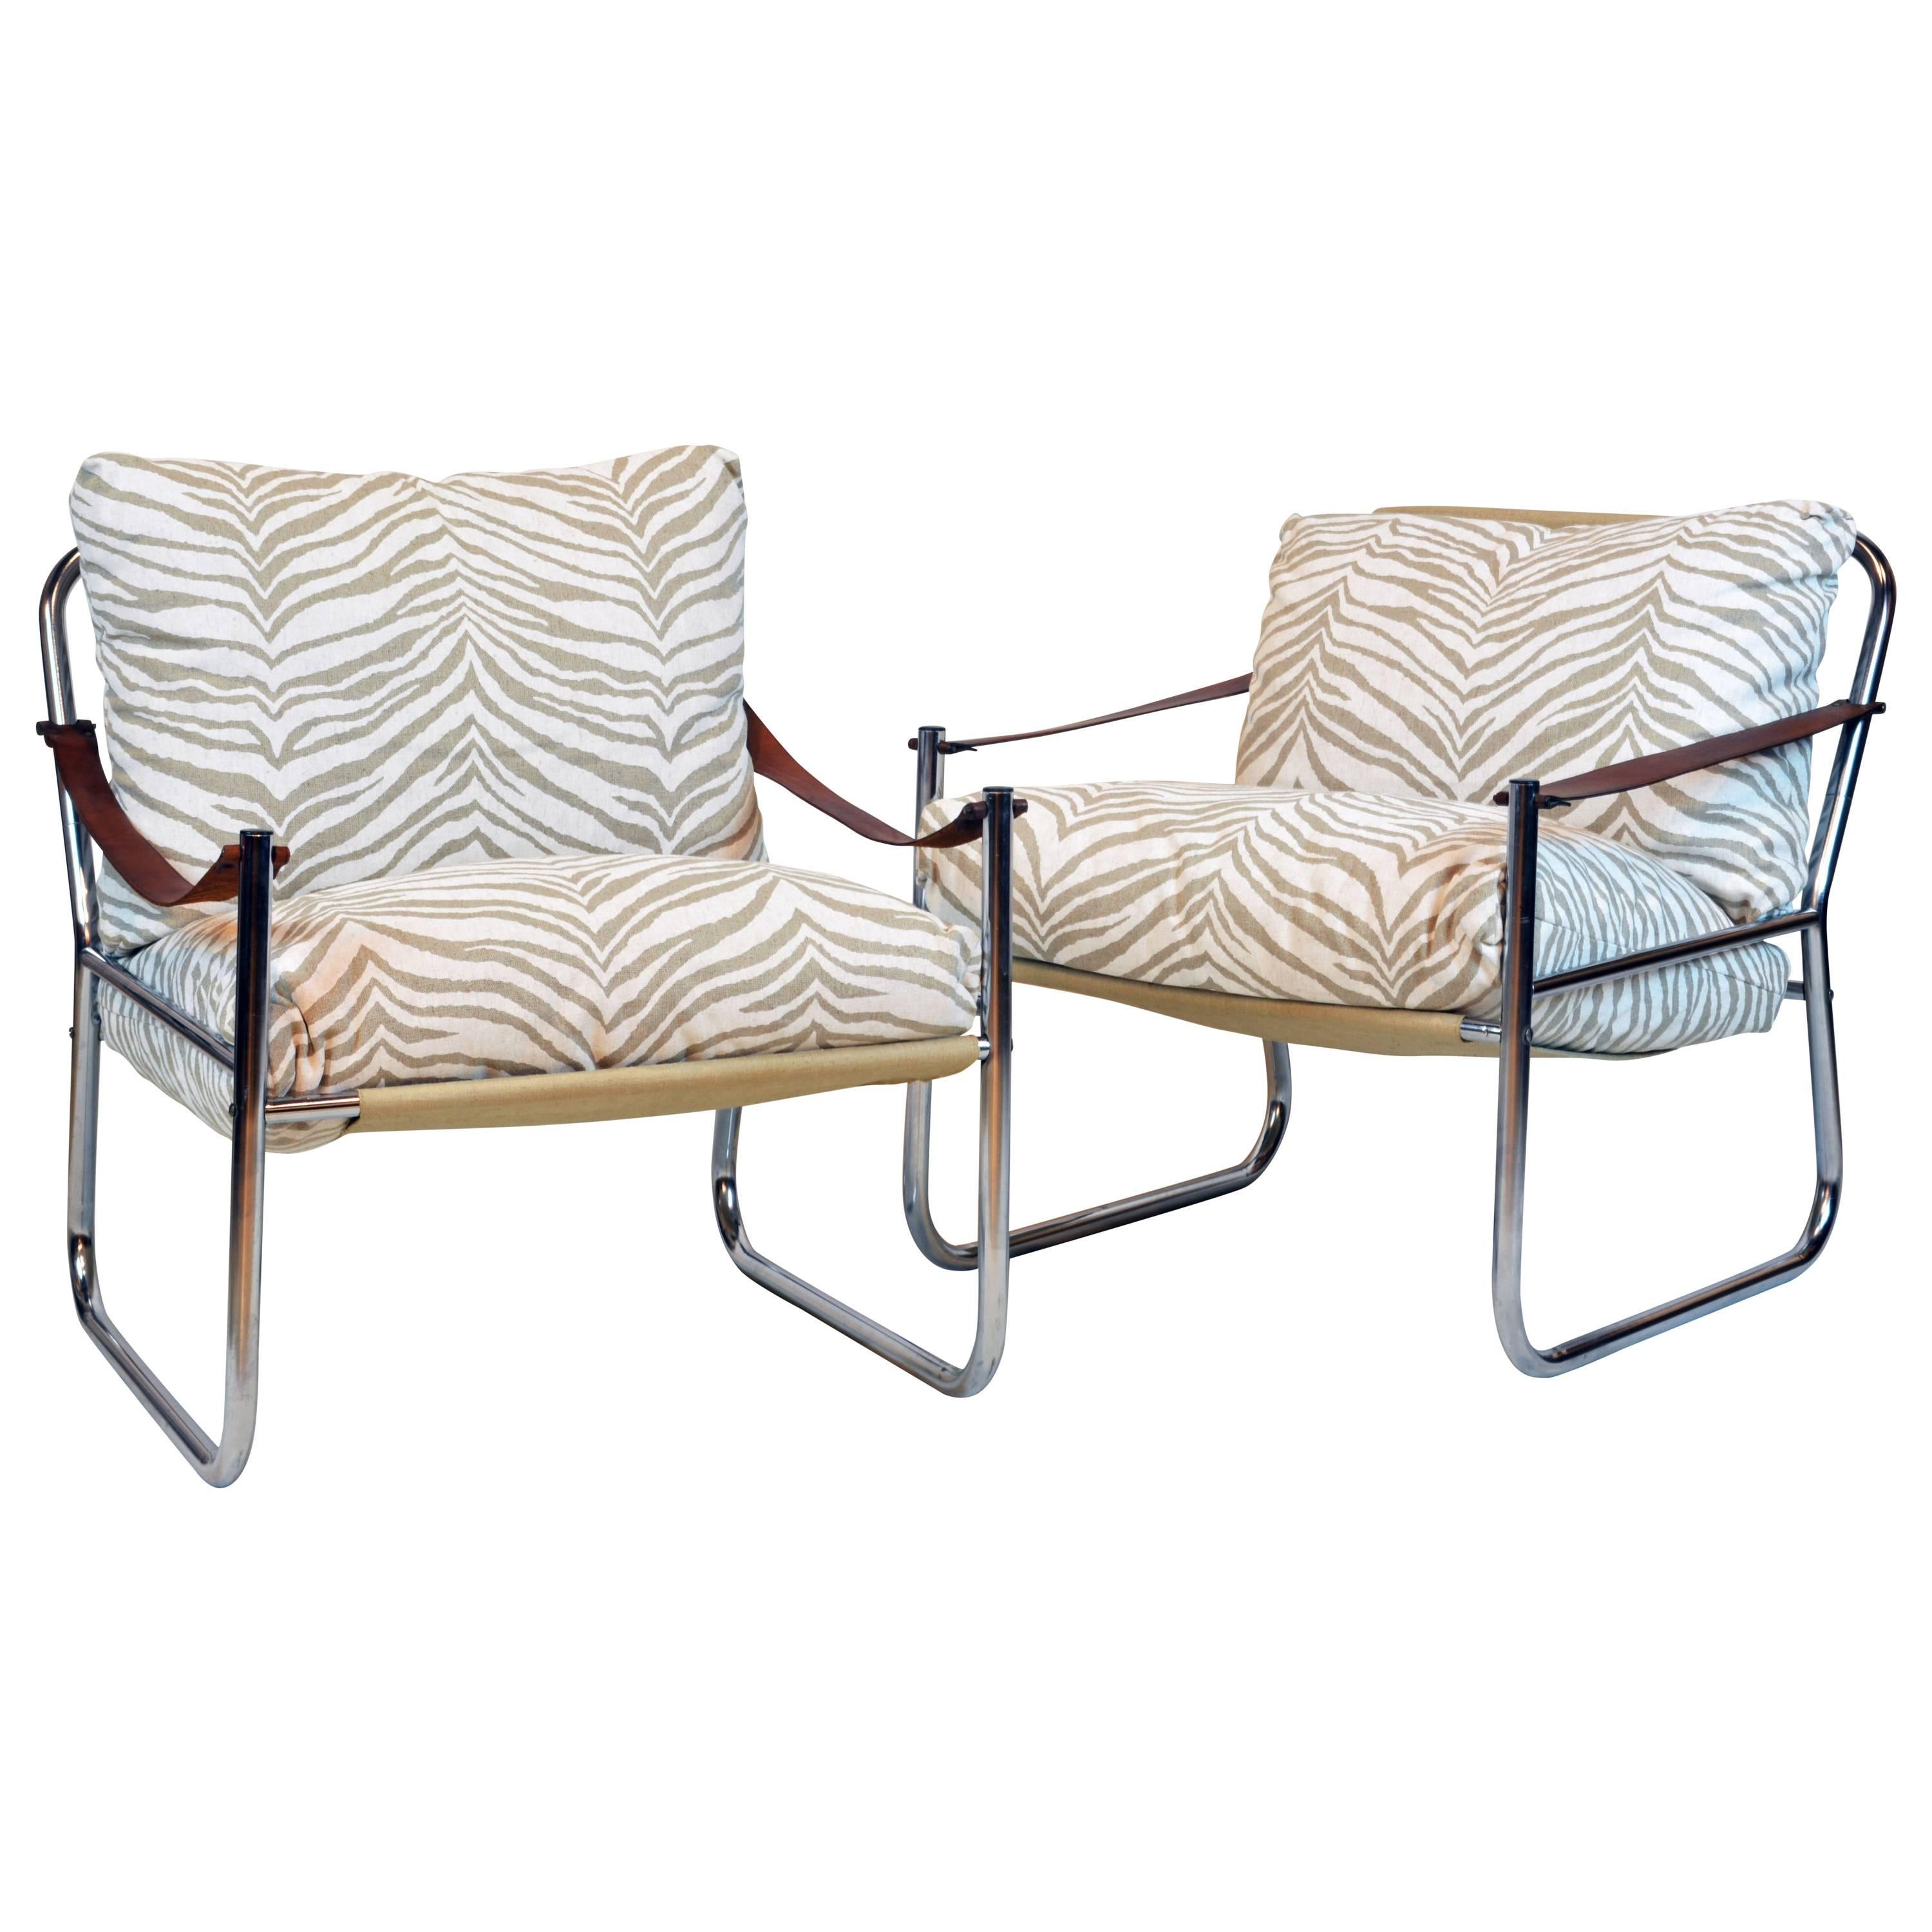 Pair of Mid-Century Modern Chrome and Leather Straps Safari Style Lounge Chairs